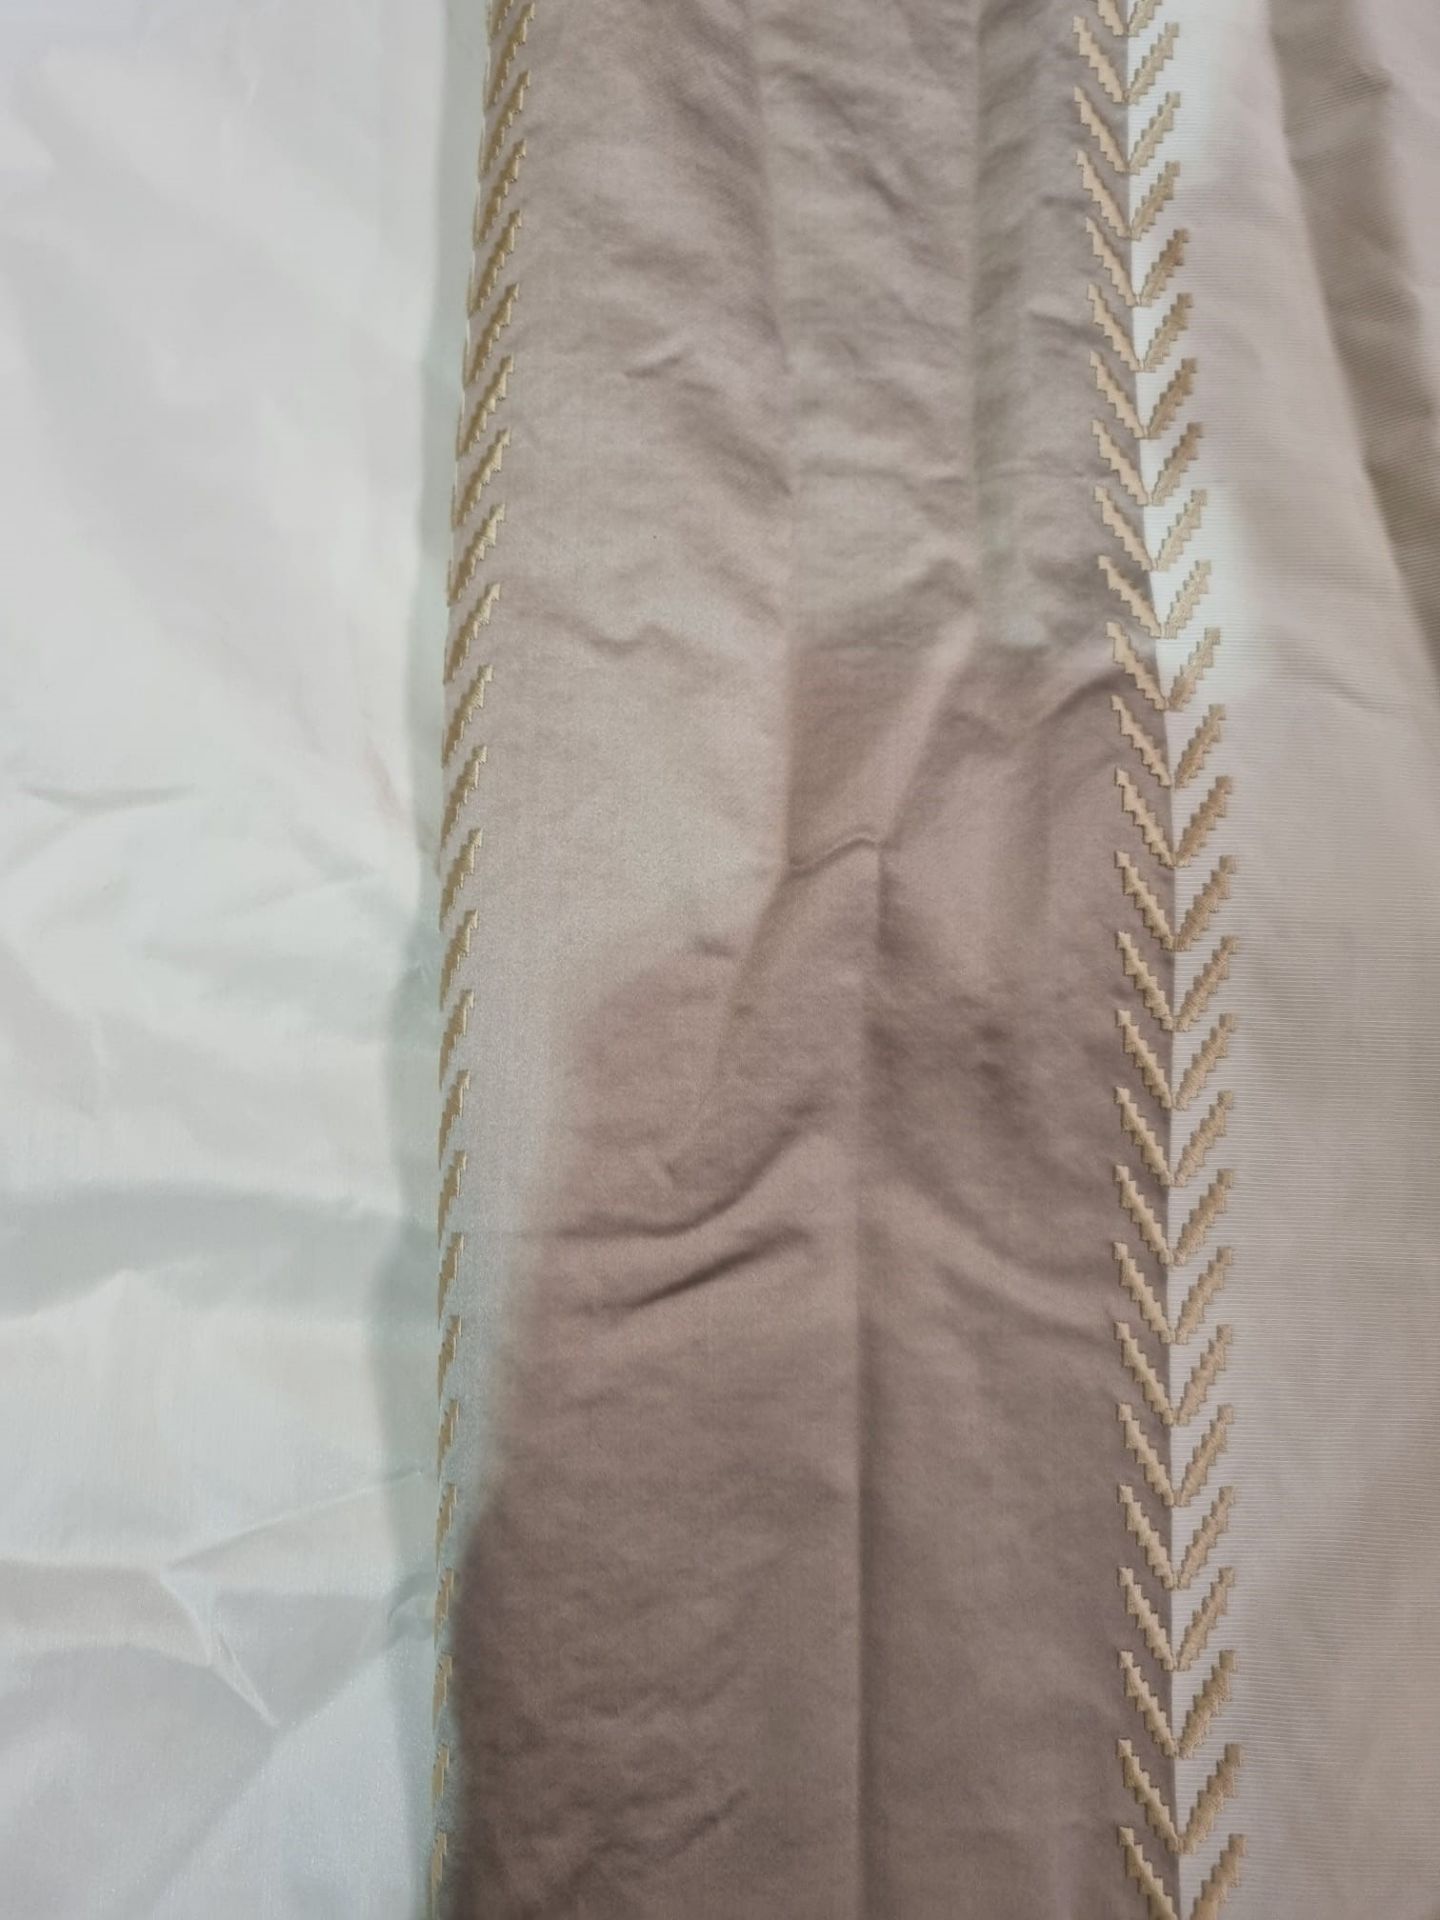 A Pair Of Cream Silk Drapes With Patterned Brown Jabots Striped Edge Trim 260 x 270cm (Dorch 43) - Image 2 of 4